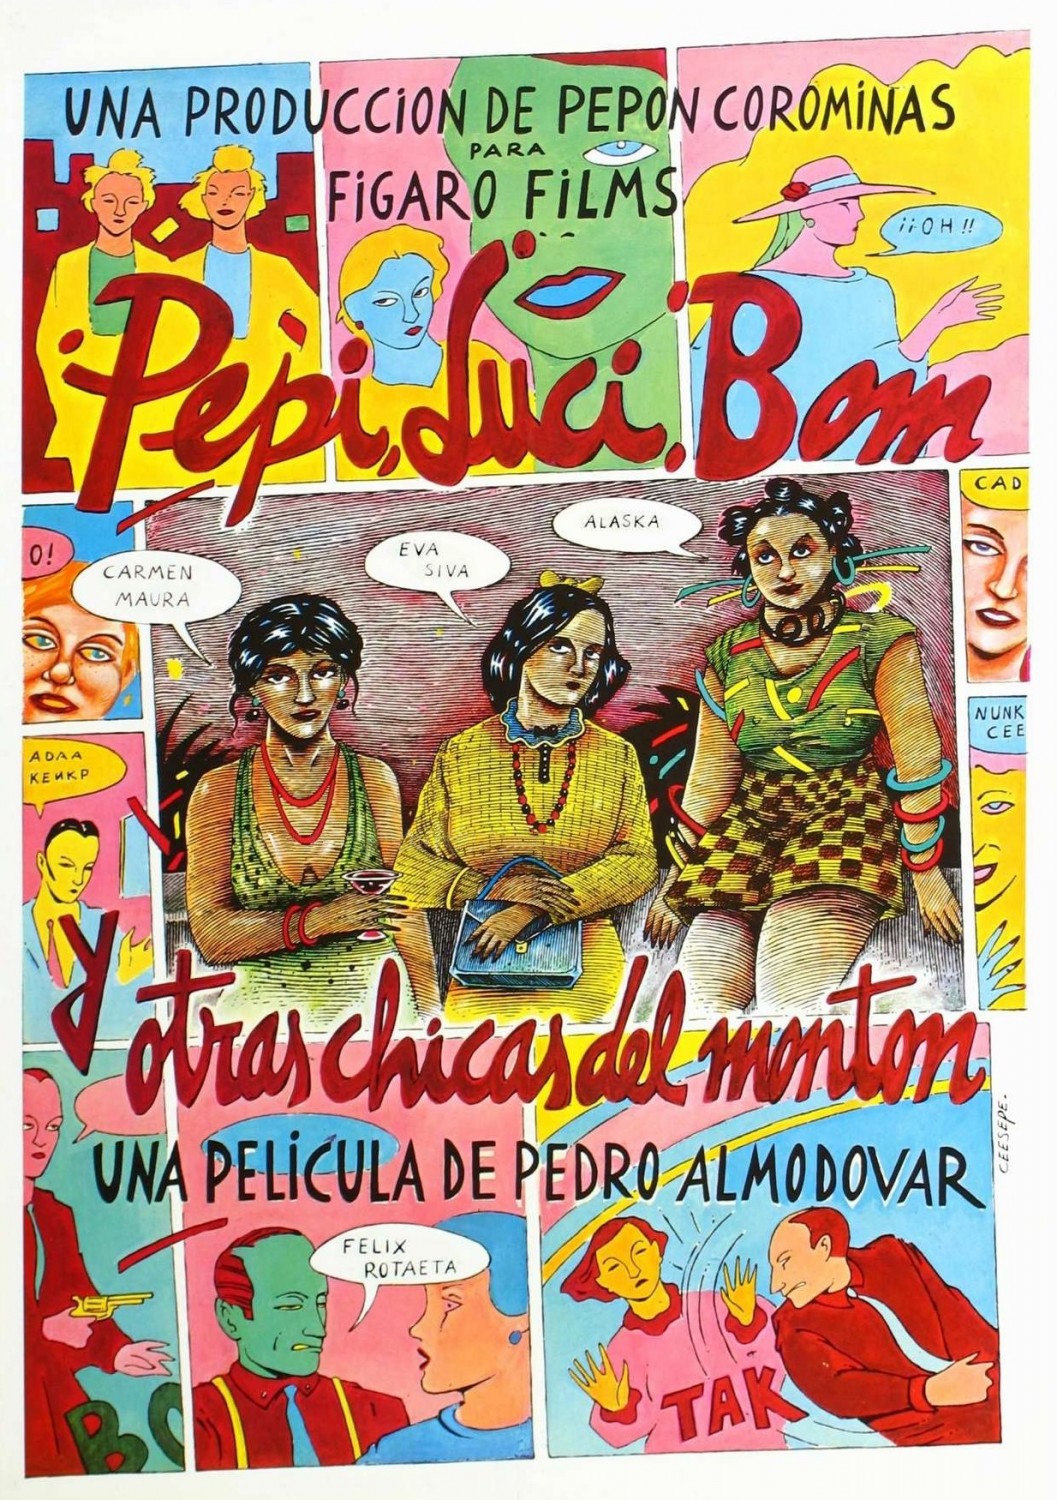 Extra Large Movie Poster Image for Pepi, Luci, Bom y otras chicas del montón 